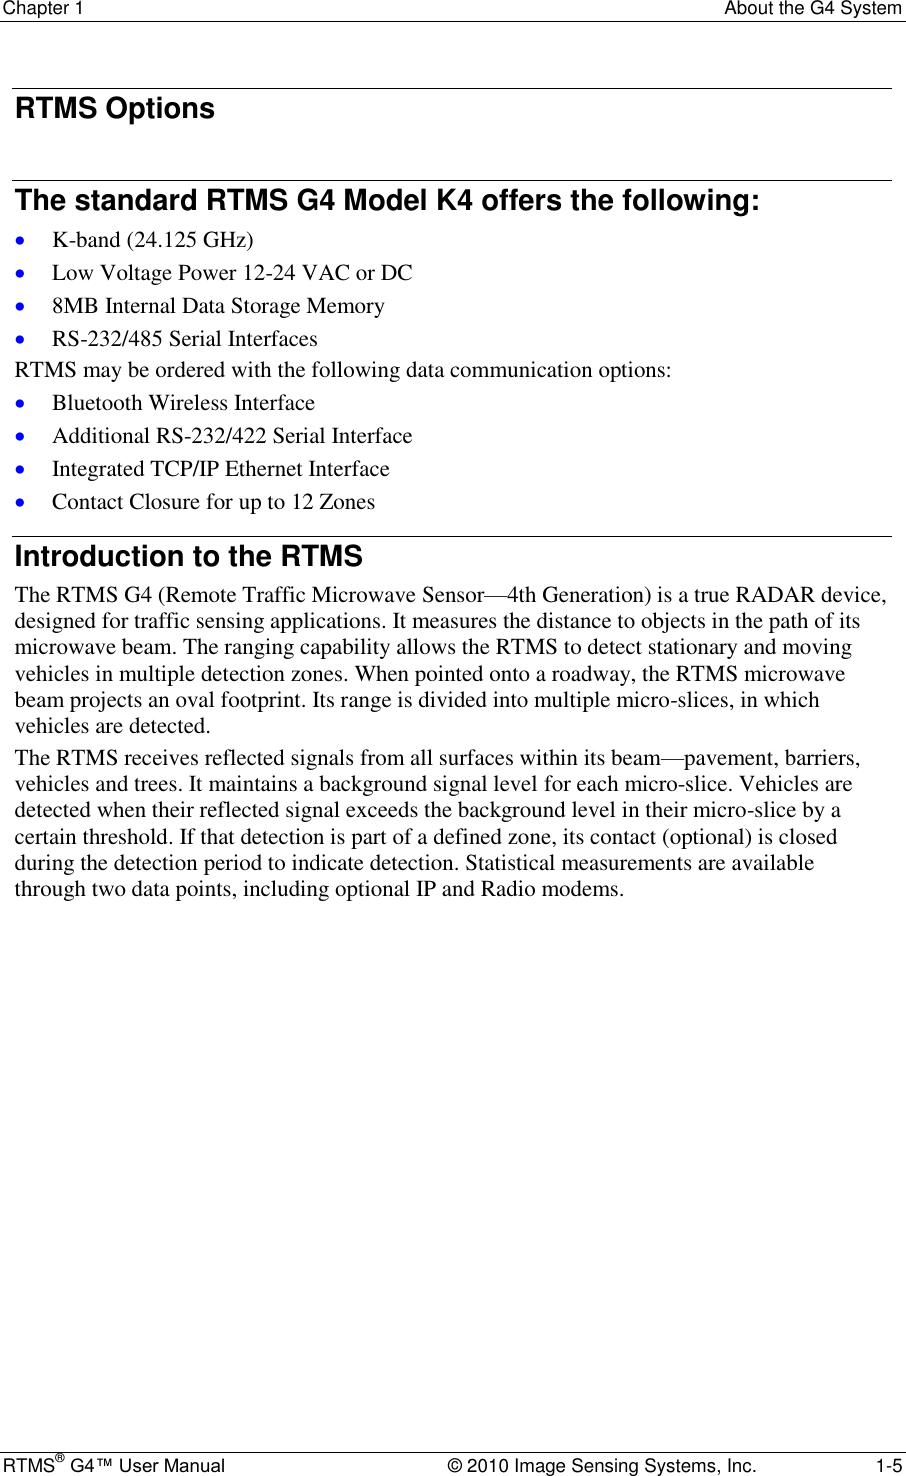 Chapter 1  About the G4 System RTMS® G4™ User Manual  © 2010 Image Sensing Systems, Inc.  1-5 RTMS Options  The standard RTMS G4 Model K4 offers the following:  K-band (24.125 GHz)  Low Voltage Power 12-24 VAC or DC  8MB Internal Data Storage Memory  RS-232/485 Serial Interfaces RTMS may be ordered with the following data communication options:  Bluetooth Wireless Interface  Additional RS-232/422 Serial Interface  Integrated TCP/IP Ethernet Interface  Contact Closure for up to 12 Zones Introduction to the RTMS The RTMS G4 (Remote Traffic Microwave Sensor—4th Generation) is a true RADAR device, designed for traffic sensing applications. It measures the distance to objects in the path of its microwave beam. The ranging capability allows the RTMS to detect stationary and moving vehicles in multiple detection zones. When pointed onto a roadway, the RTMS microwave beam projects an oval footprint. Its range is divided into multiple micro-slices, in which vehicles are detected. The RTMS receives reflected signals from all surfaces within its beam—pavement, barriers, vehicles and trees. It maintains a background signal level for each micro-slice. Vehicles are detected when their reflected signal exceeds the background level in their micro-slice by a certain threshold. If that detection is part of a defined zone, its contact (optional) is closed during the detection period to indicate detection. Statistical measurements are available through two data points, including optional IP and Radio modems. 